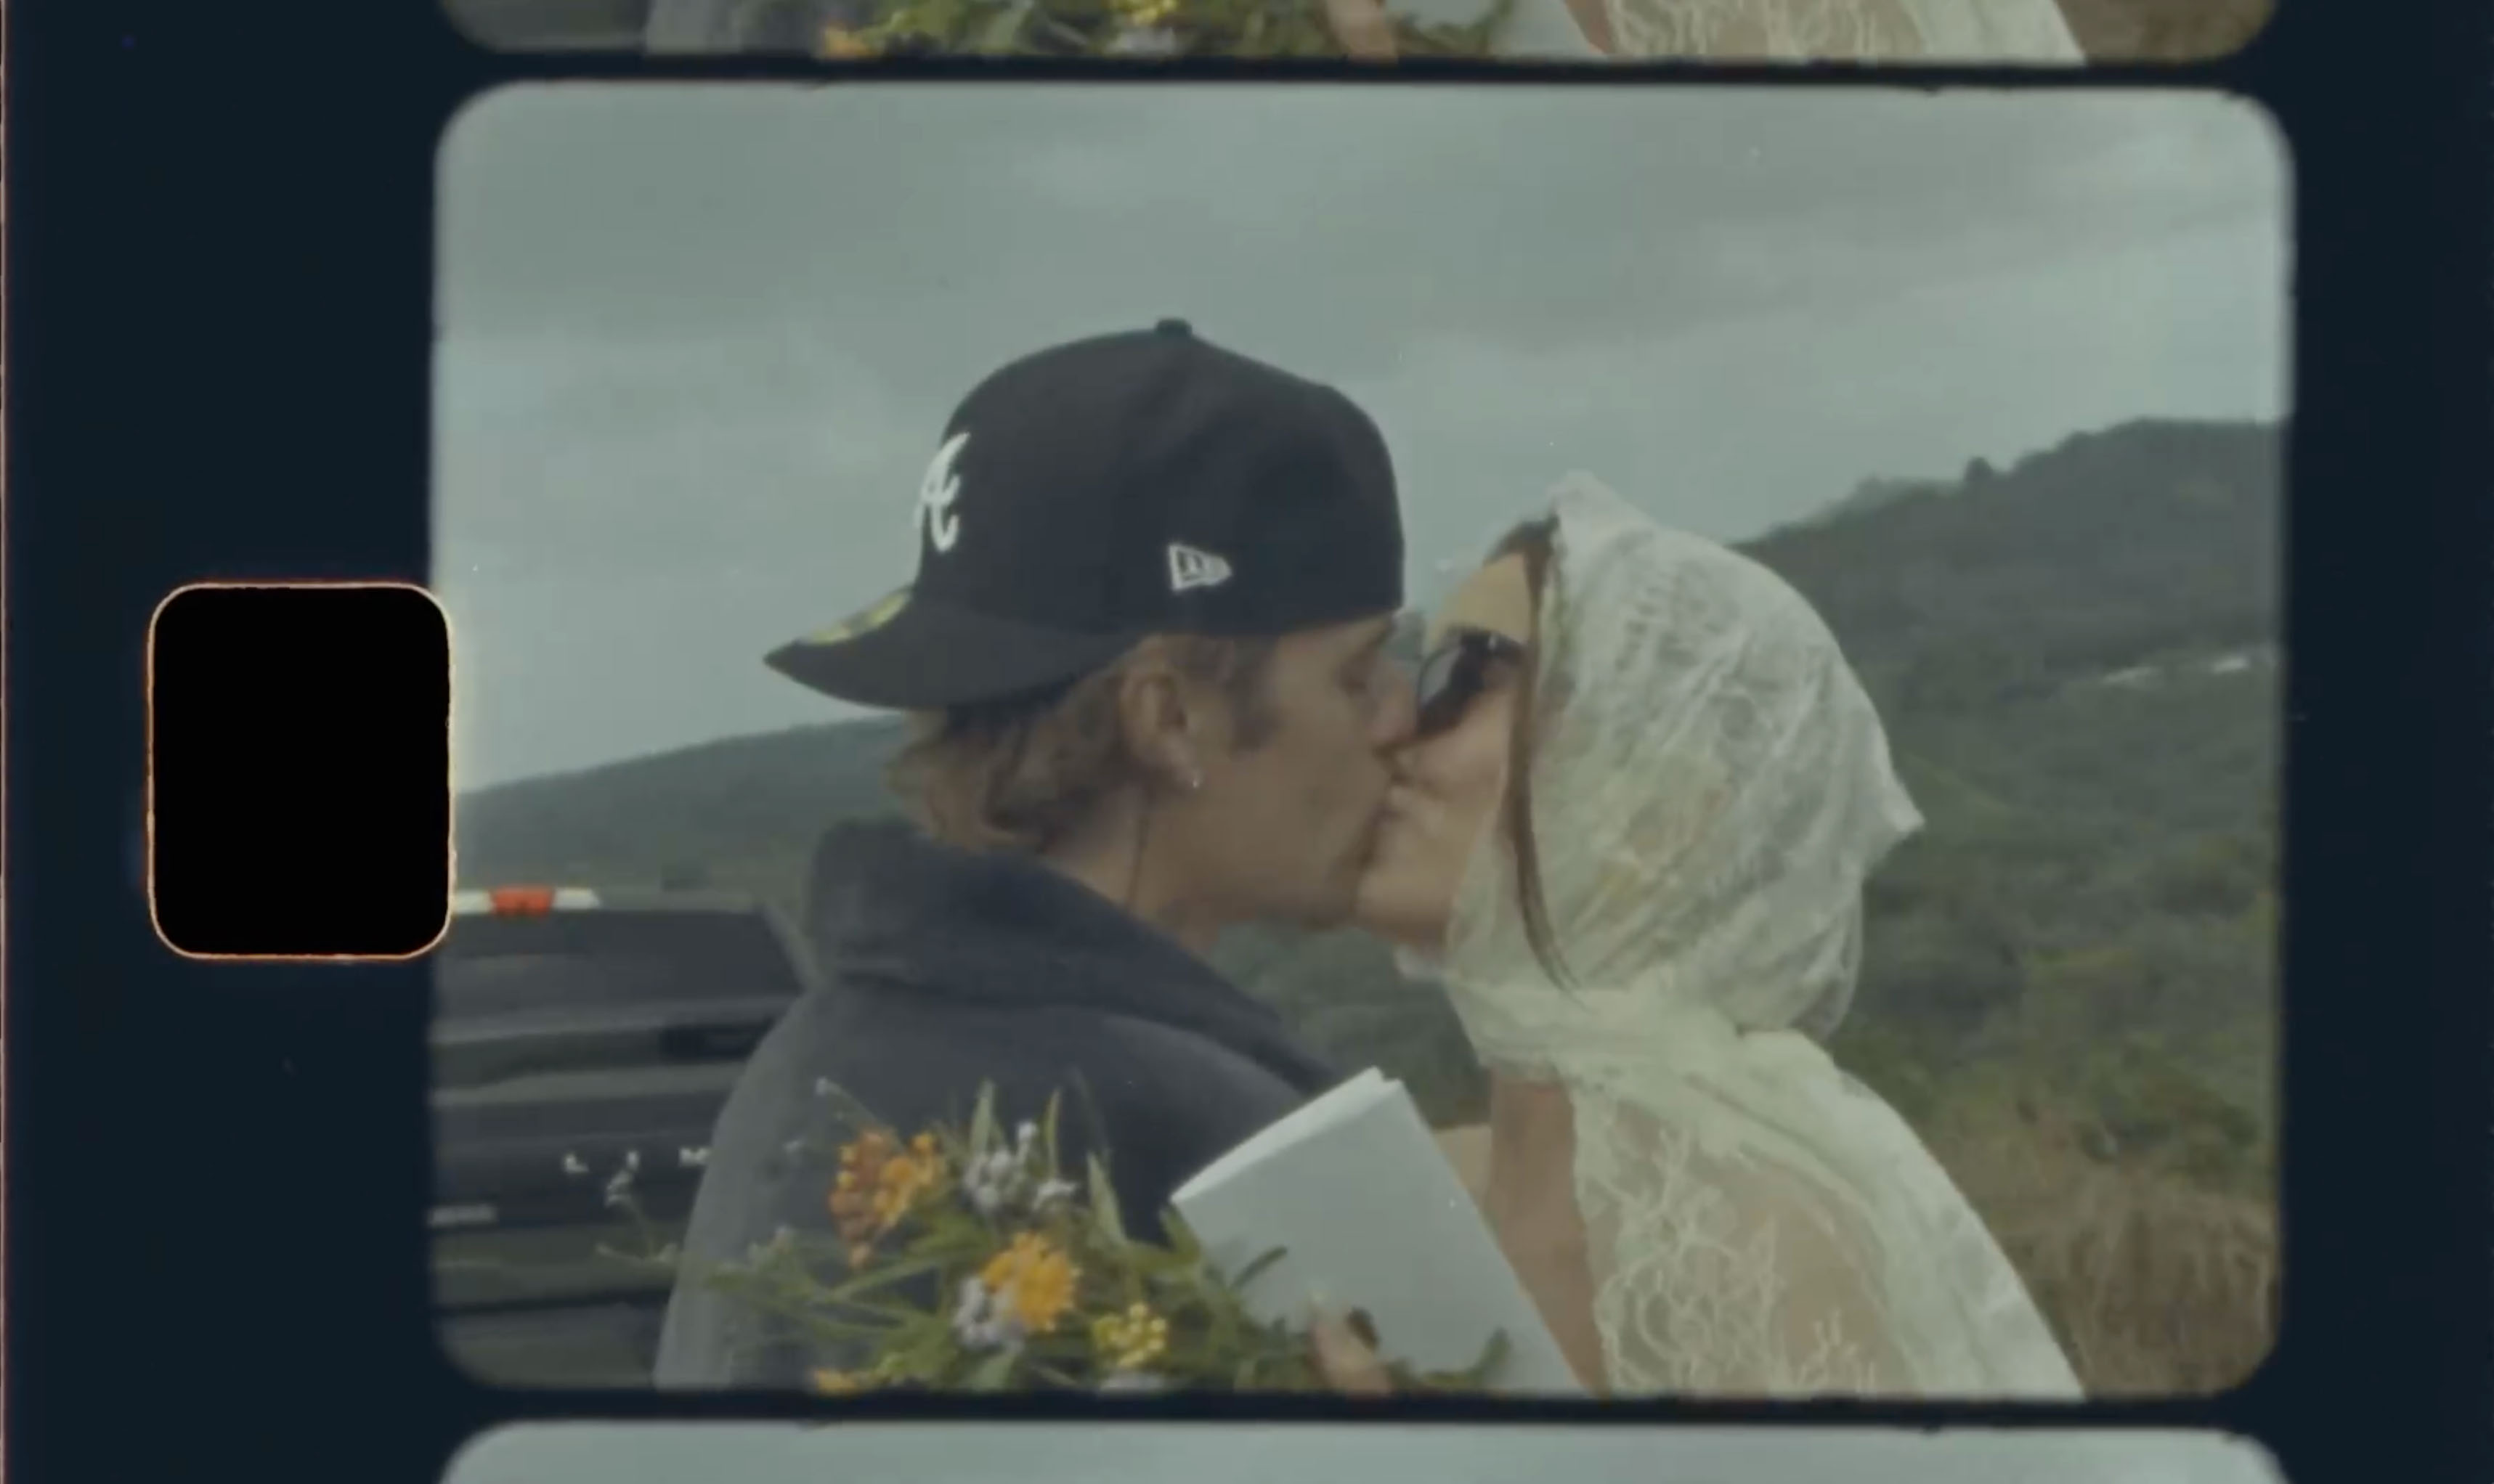 Justin sported a backward Atlanta Braves baseball cap as he was shown kissing his wife of five years